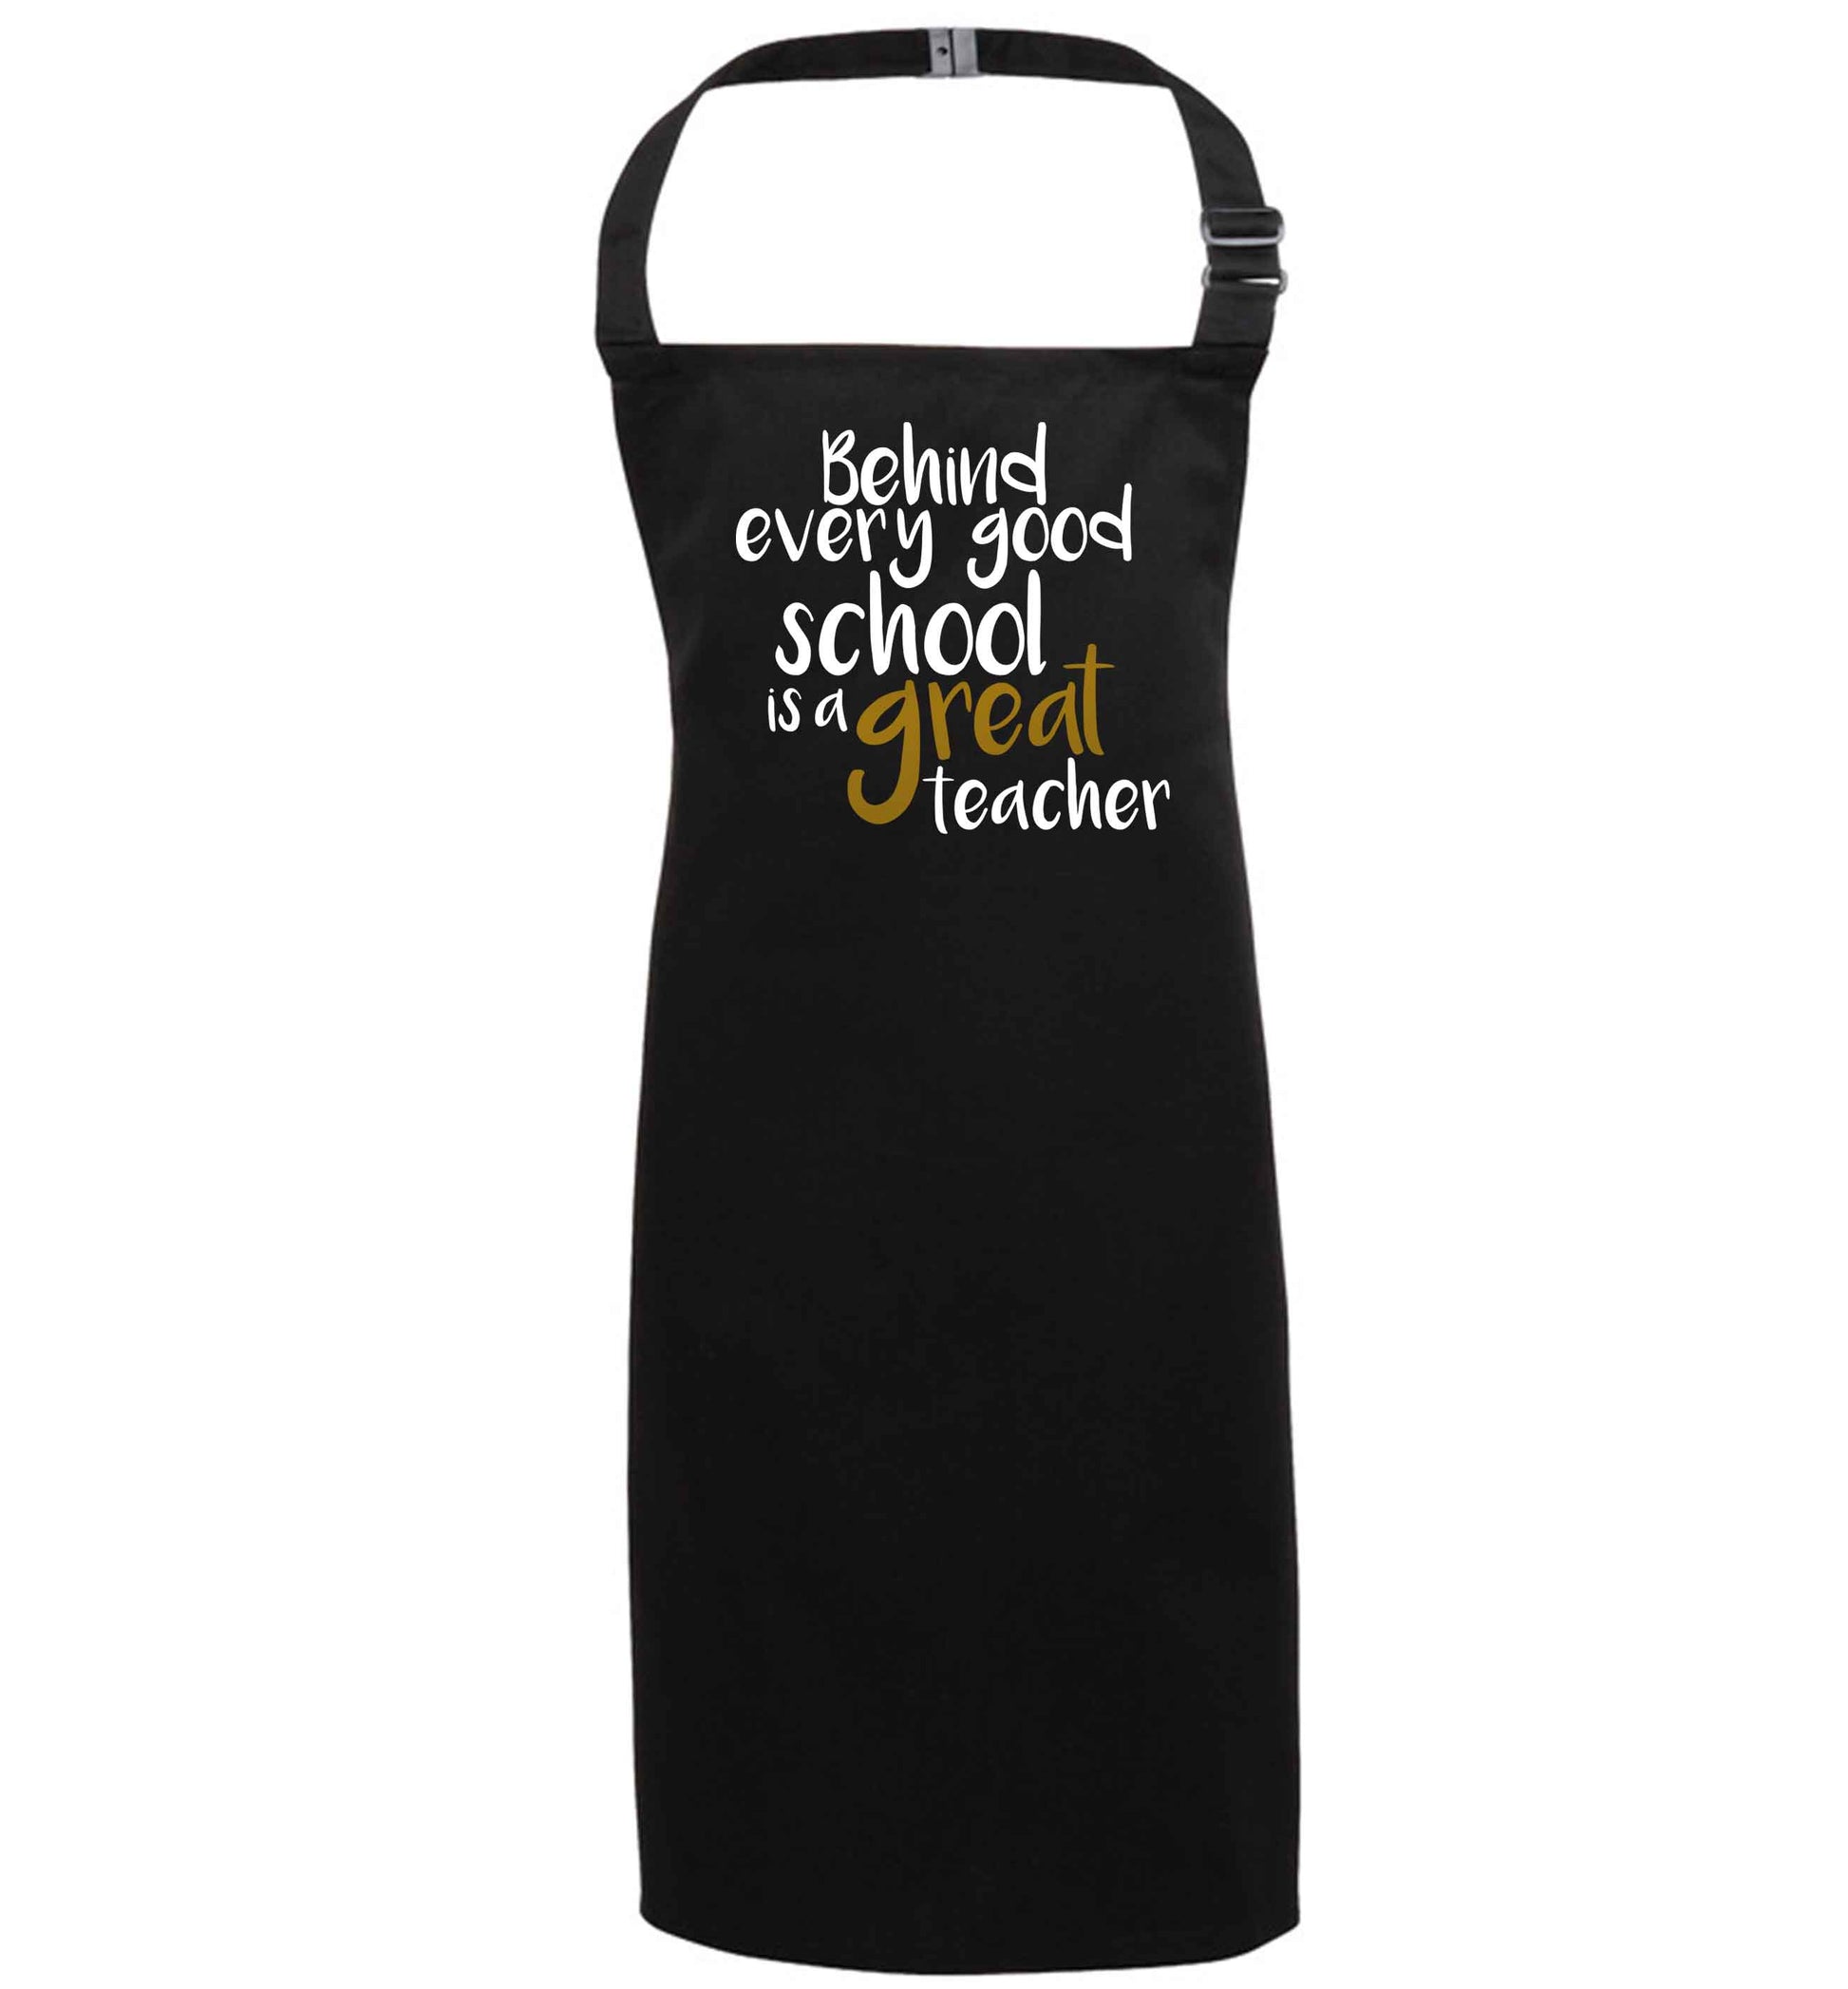 Behind every good school is a great teacher black apron 7-10 years